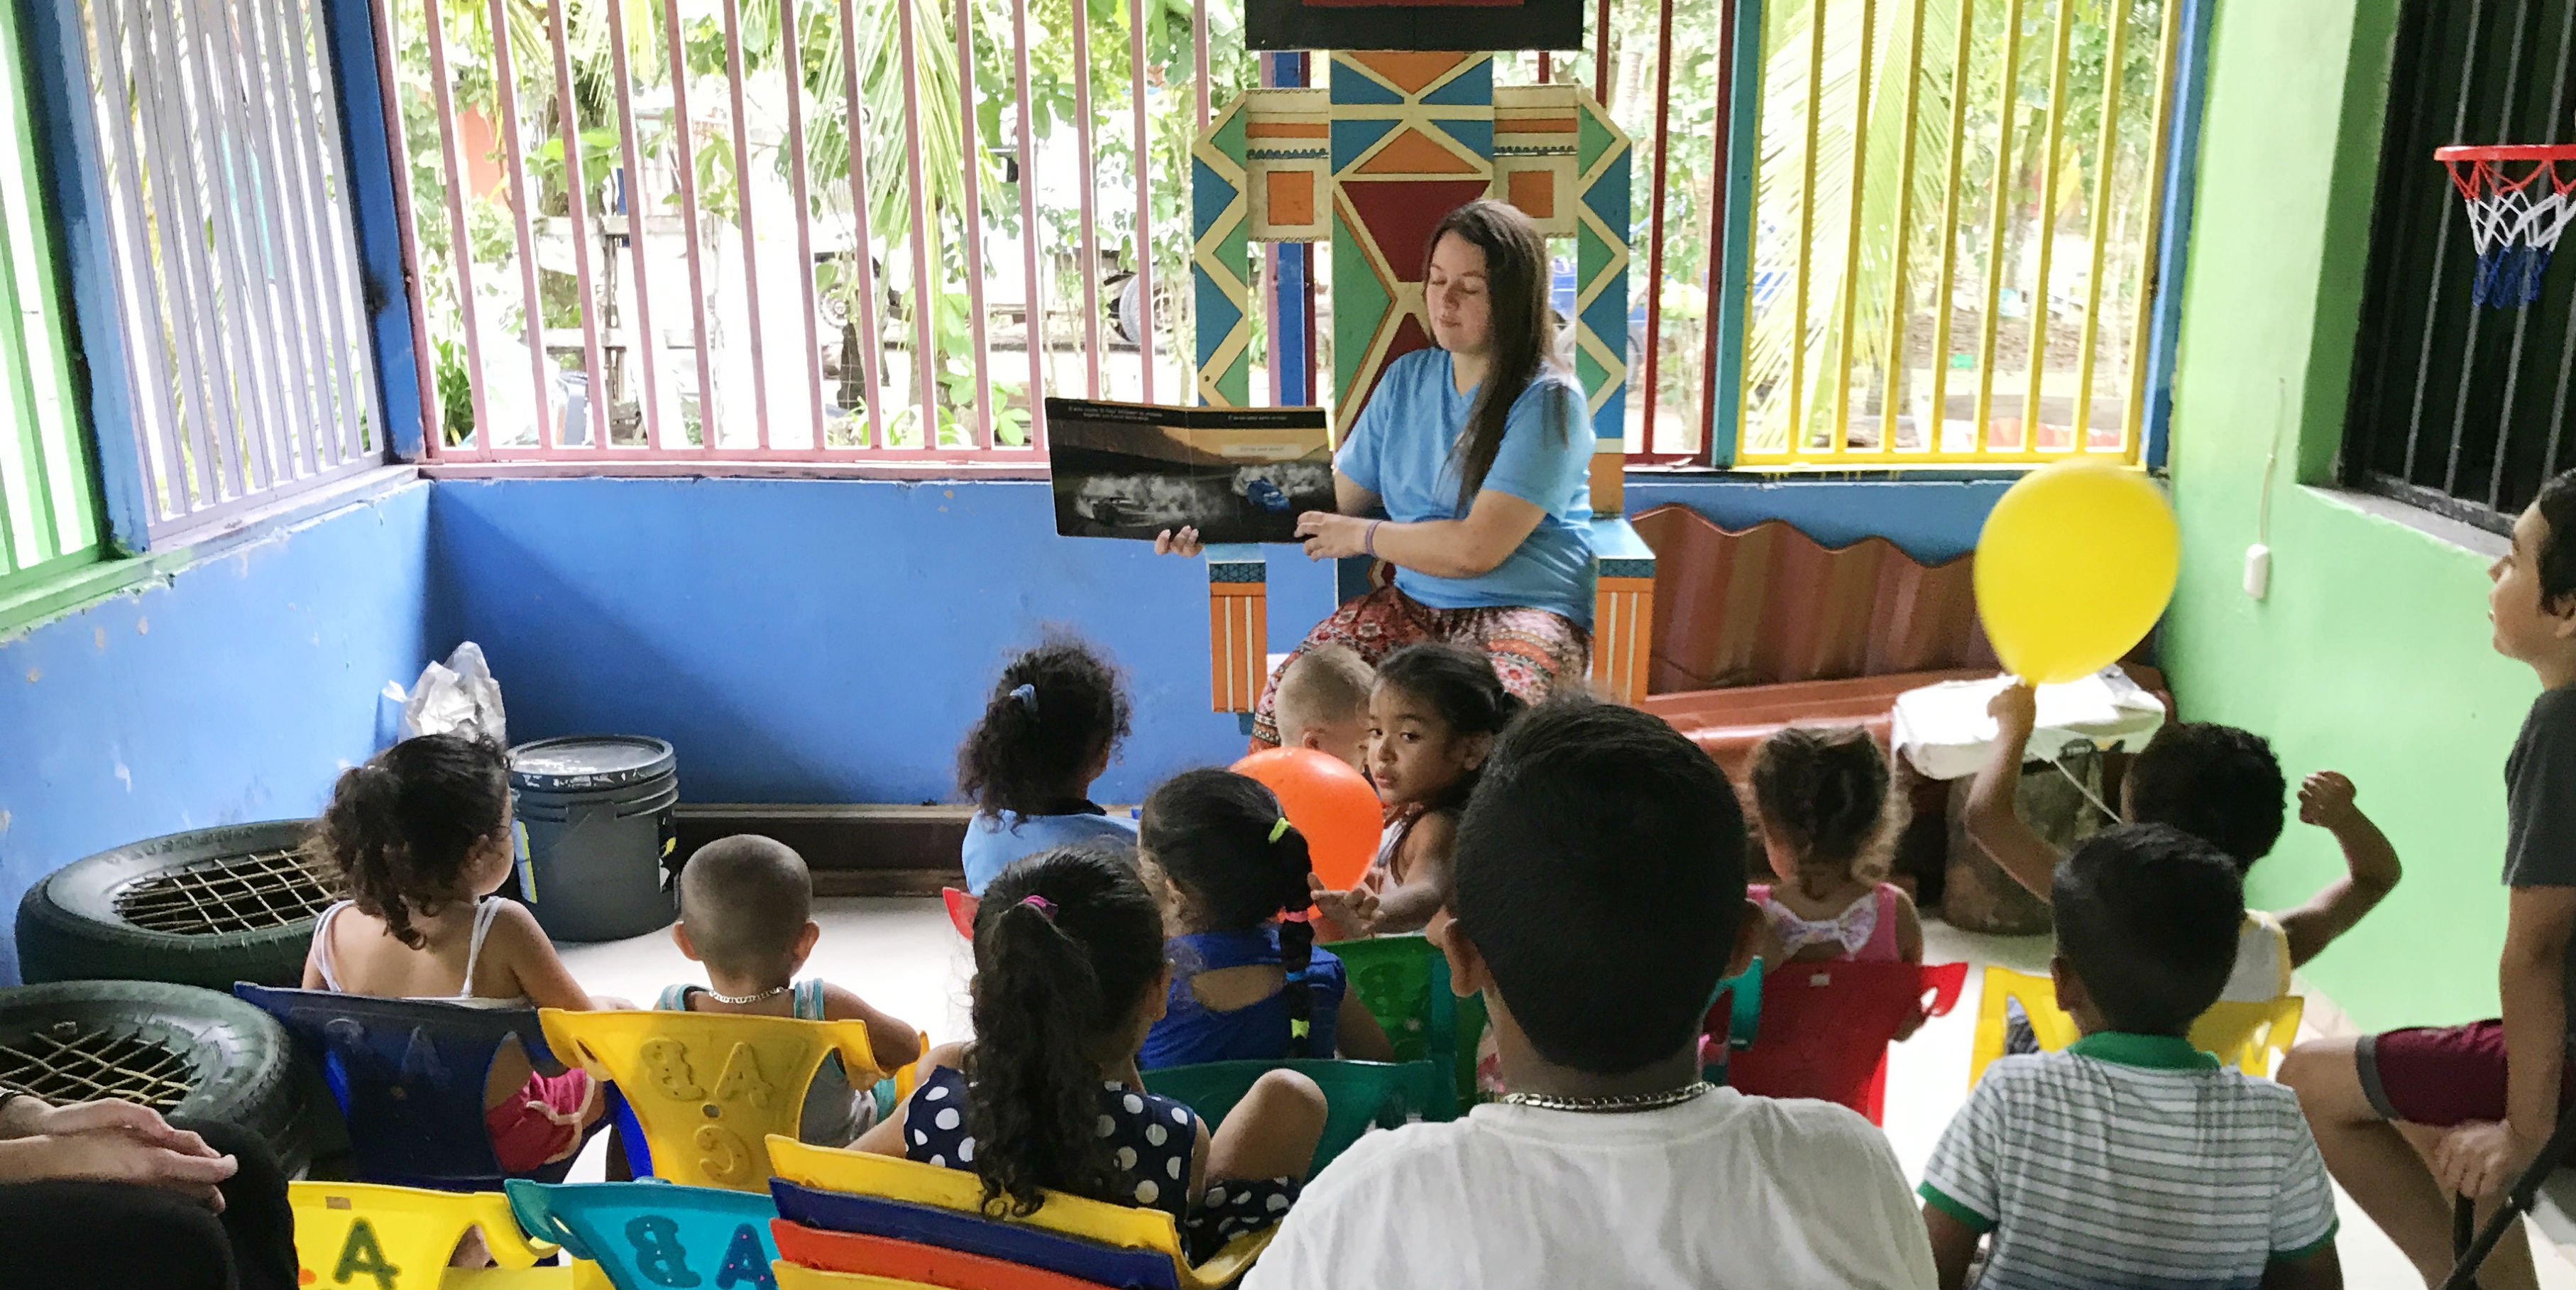 A TEFL certified teacher leads story time in Quepos, Costa Rica.